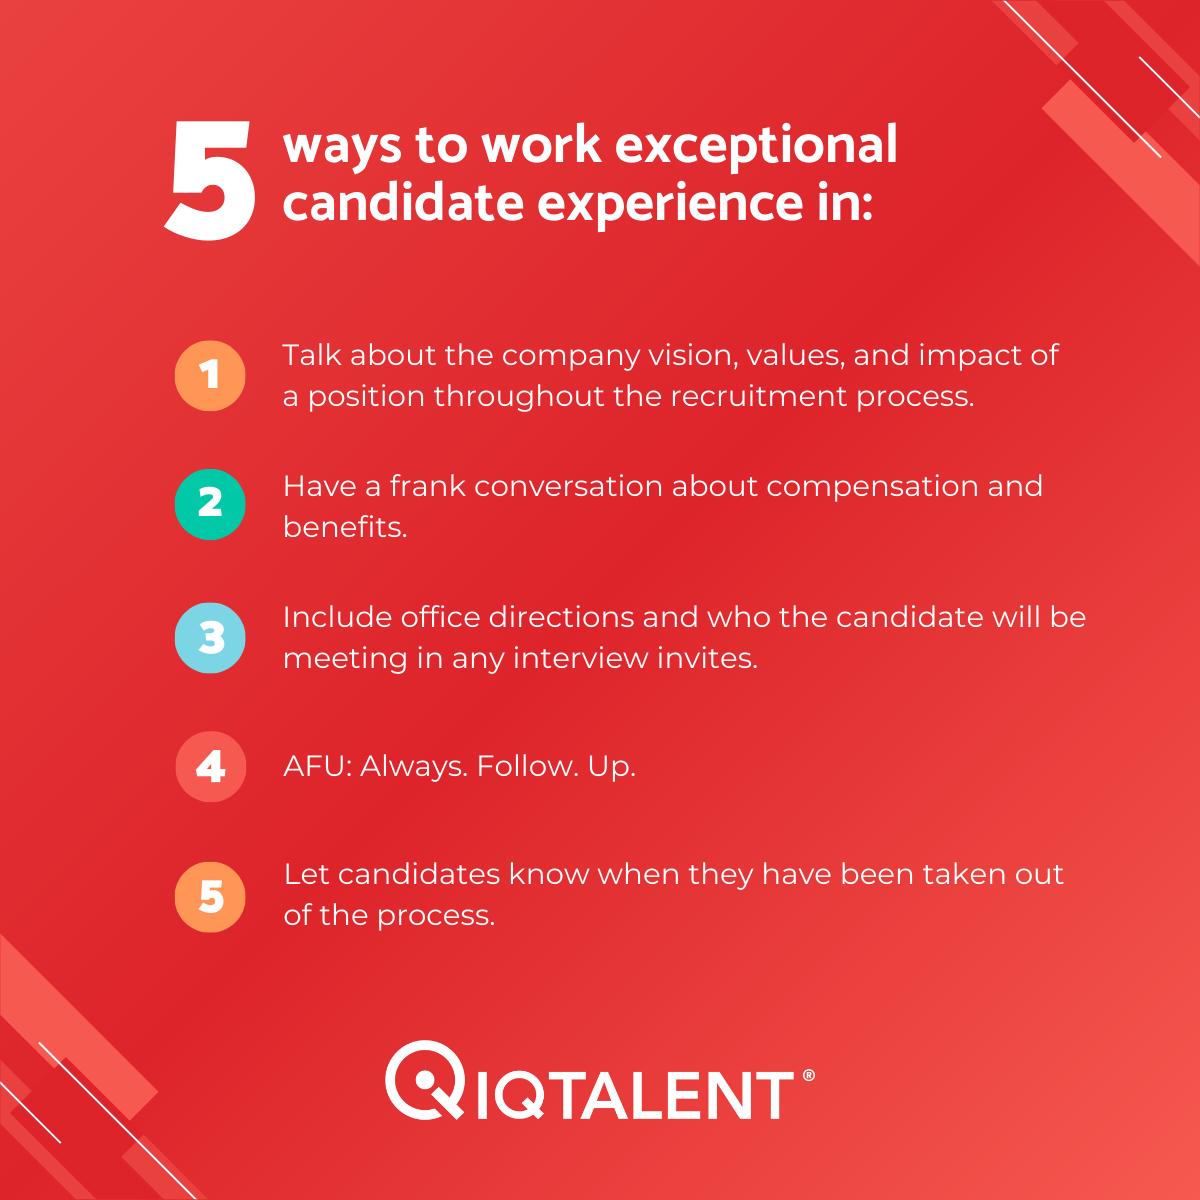 5 Ways to Work Exceptional Candidate Experience In